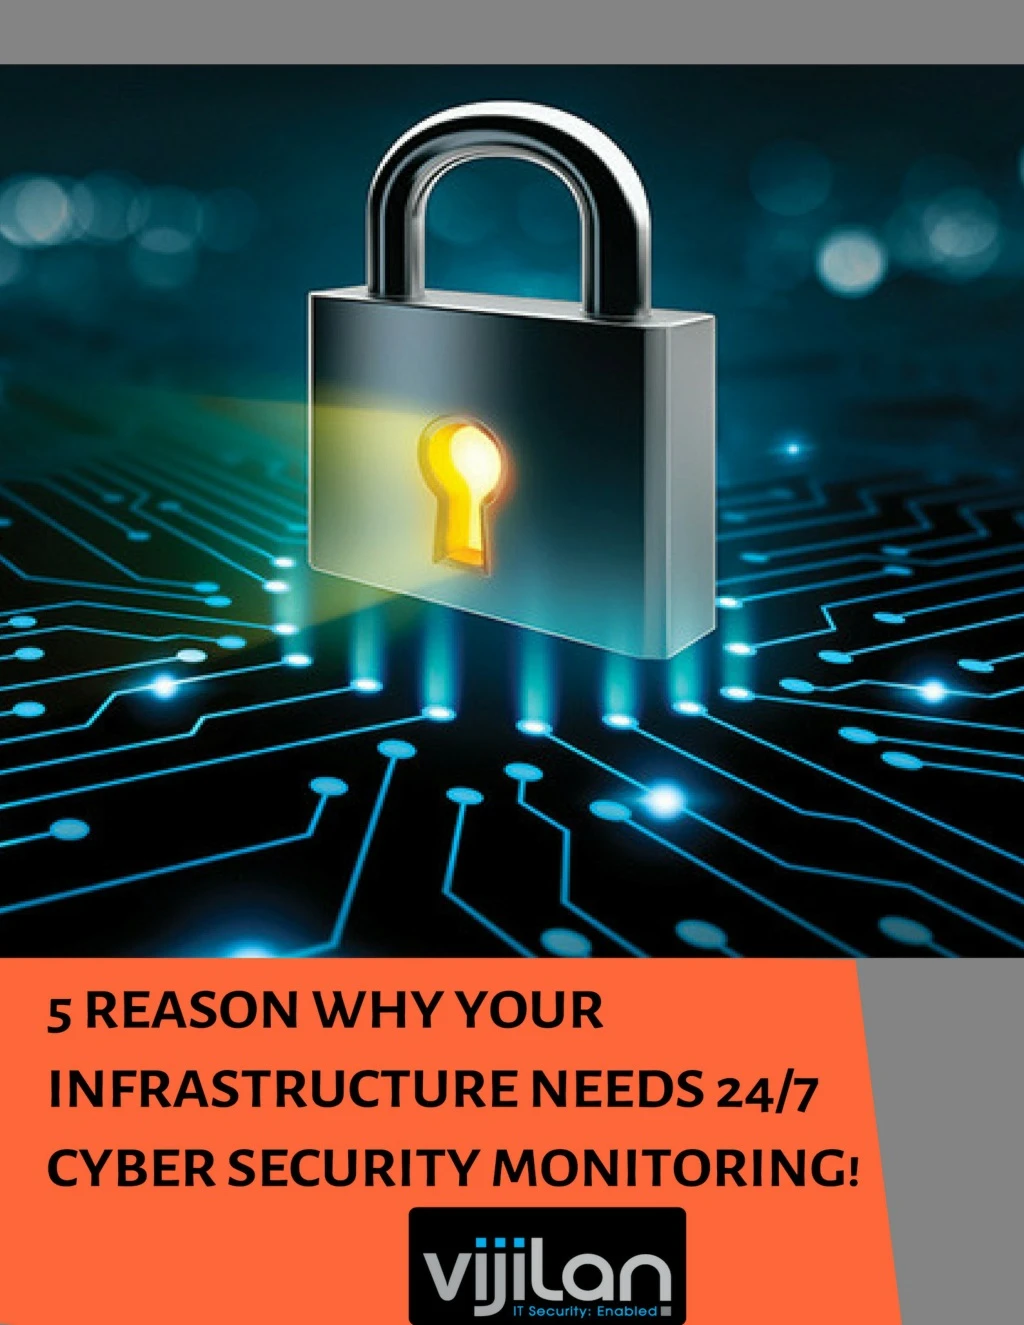 5 reasons why your infrastructure needs